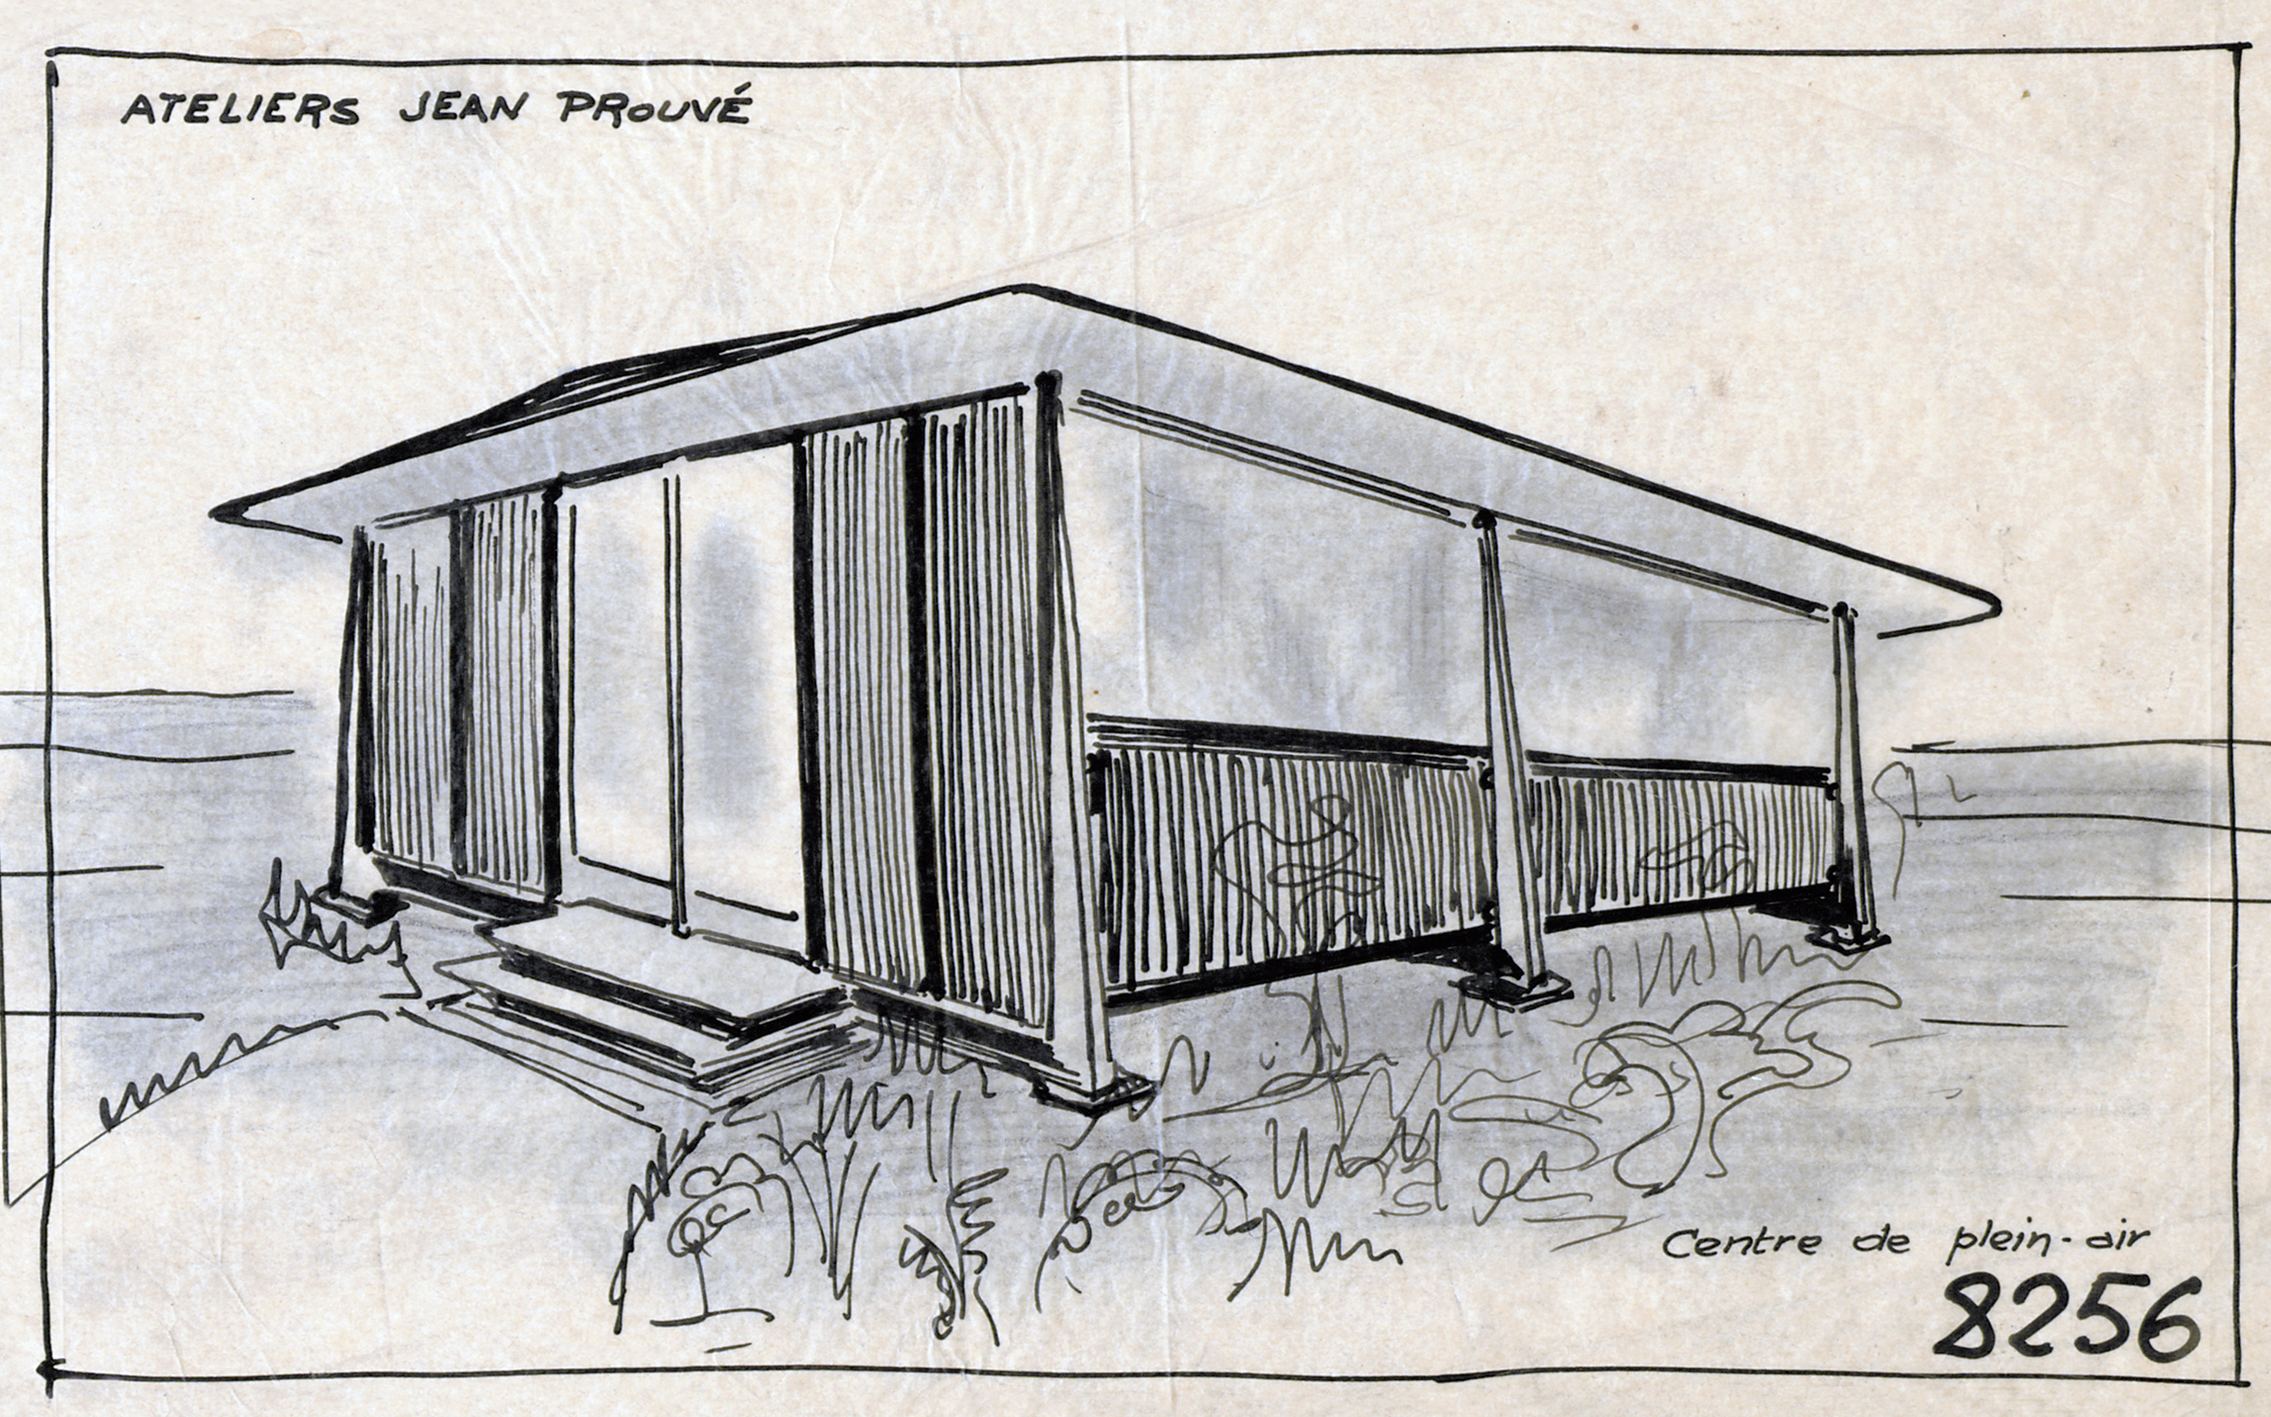 Ateliers Jean Prouvé “ Outdoor recreation center ”. Sketch no. 8256, May 1940.